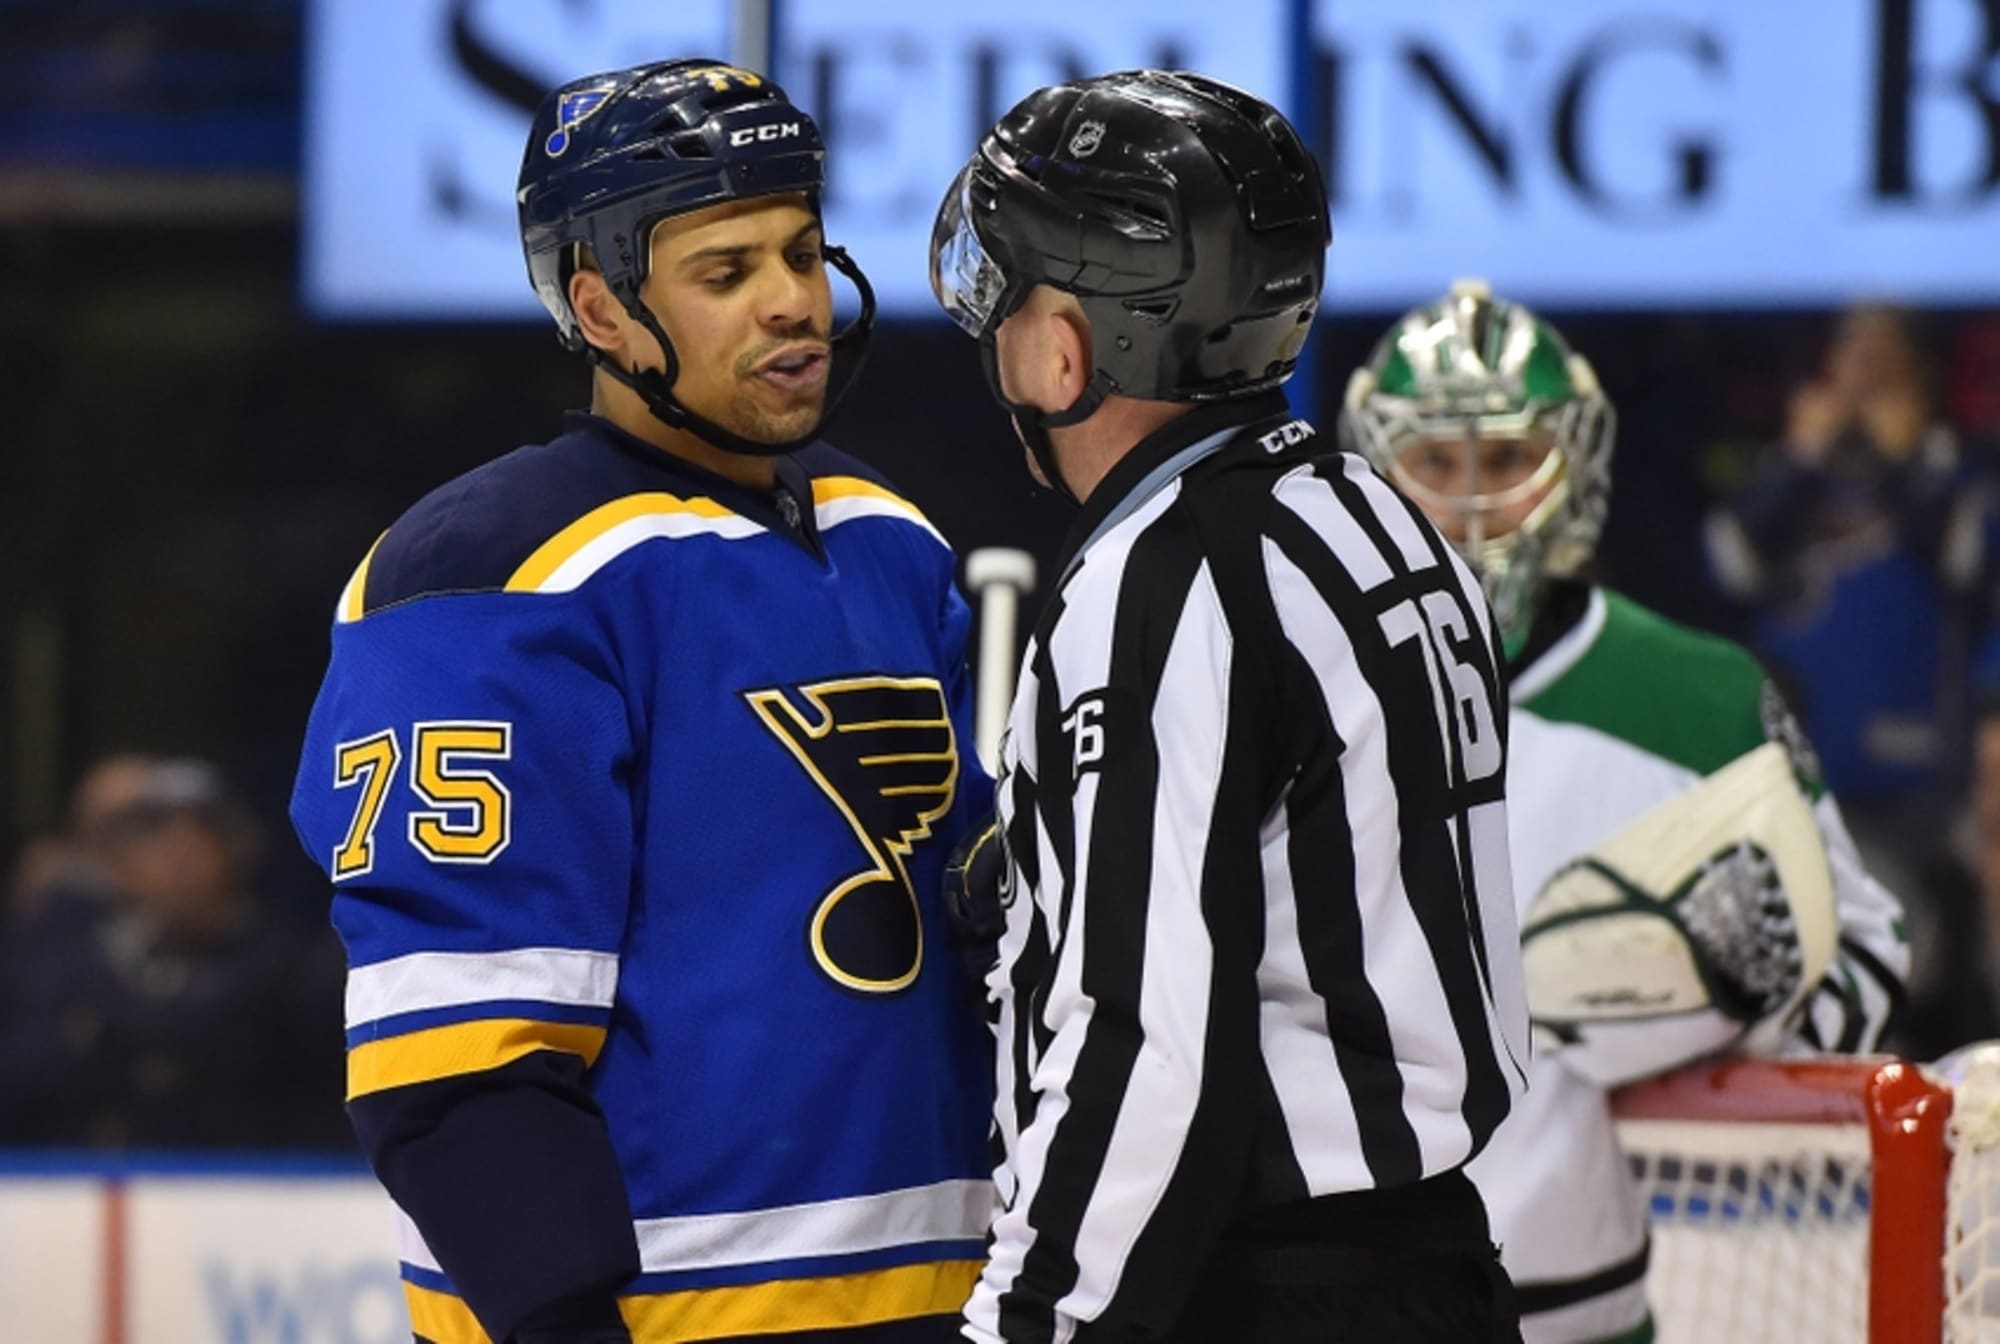 When darkness fails – EA Sports fades St. Louis Blues' Ryan Reaves too  black in game